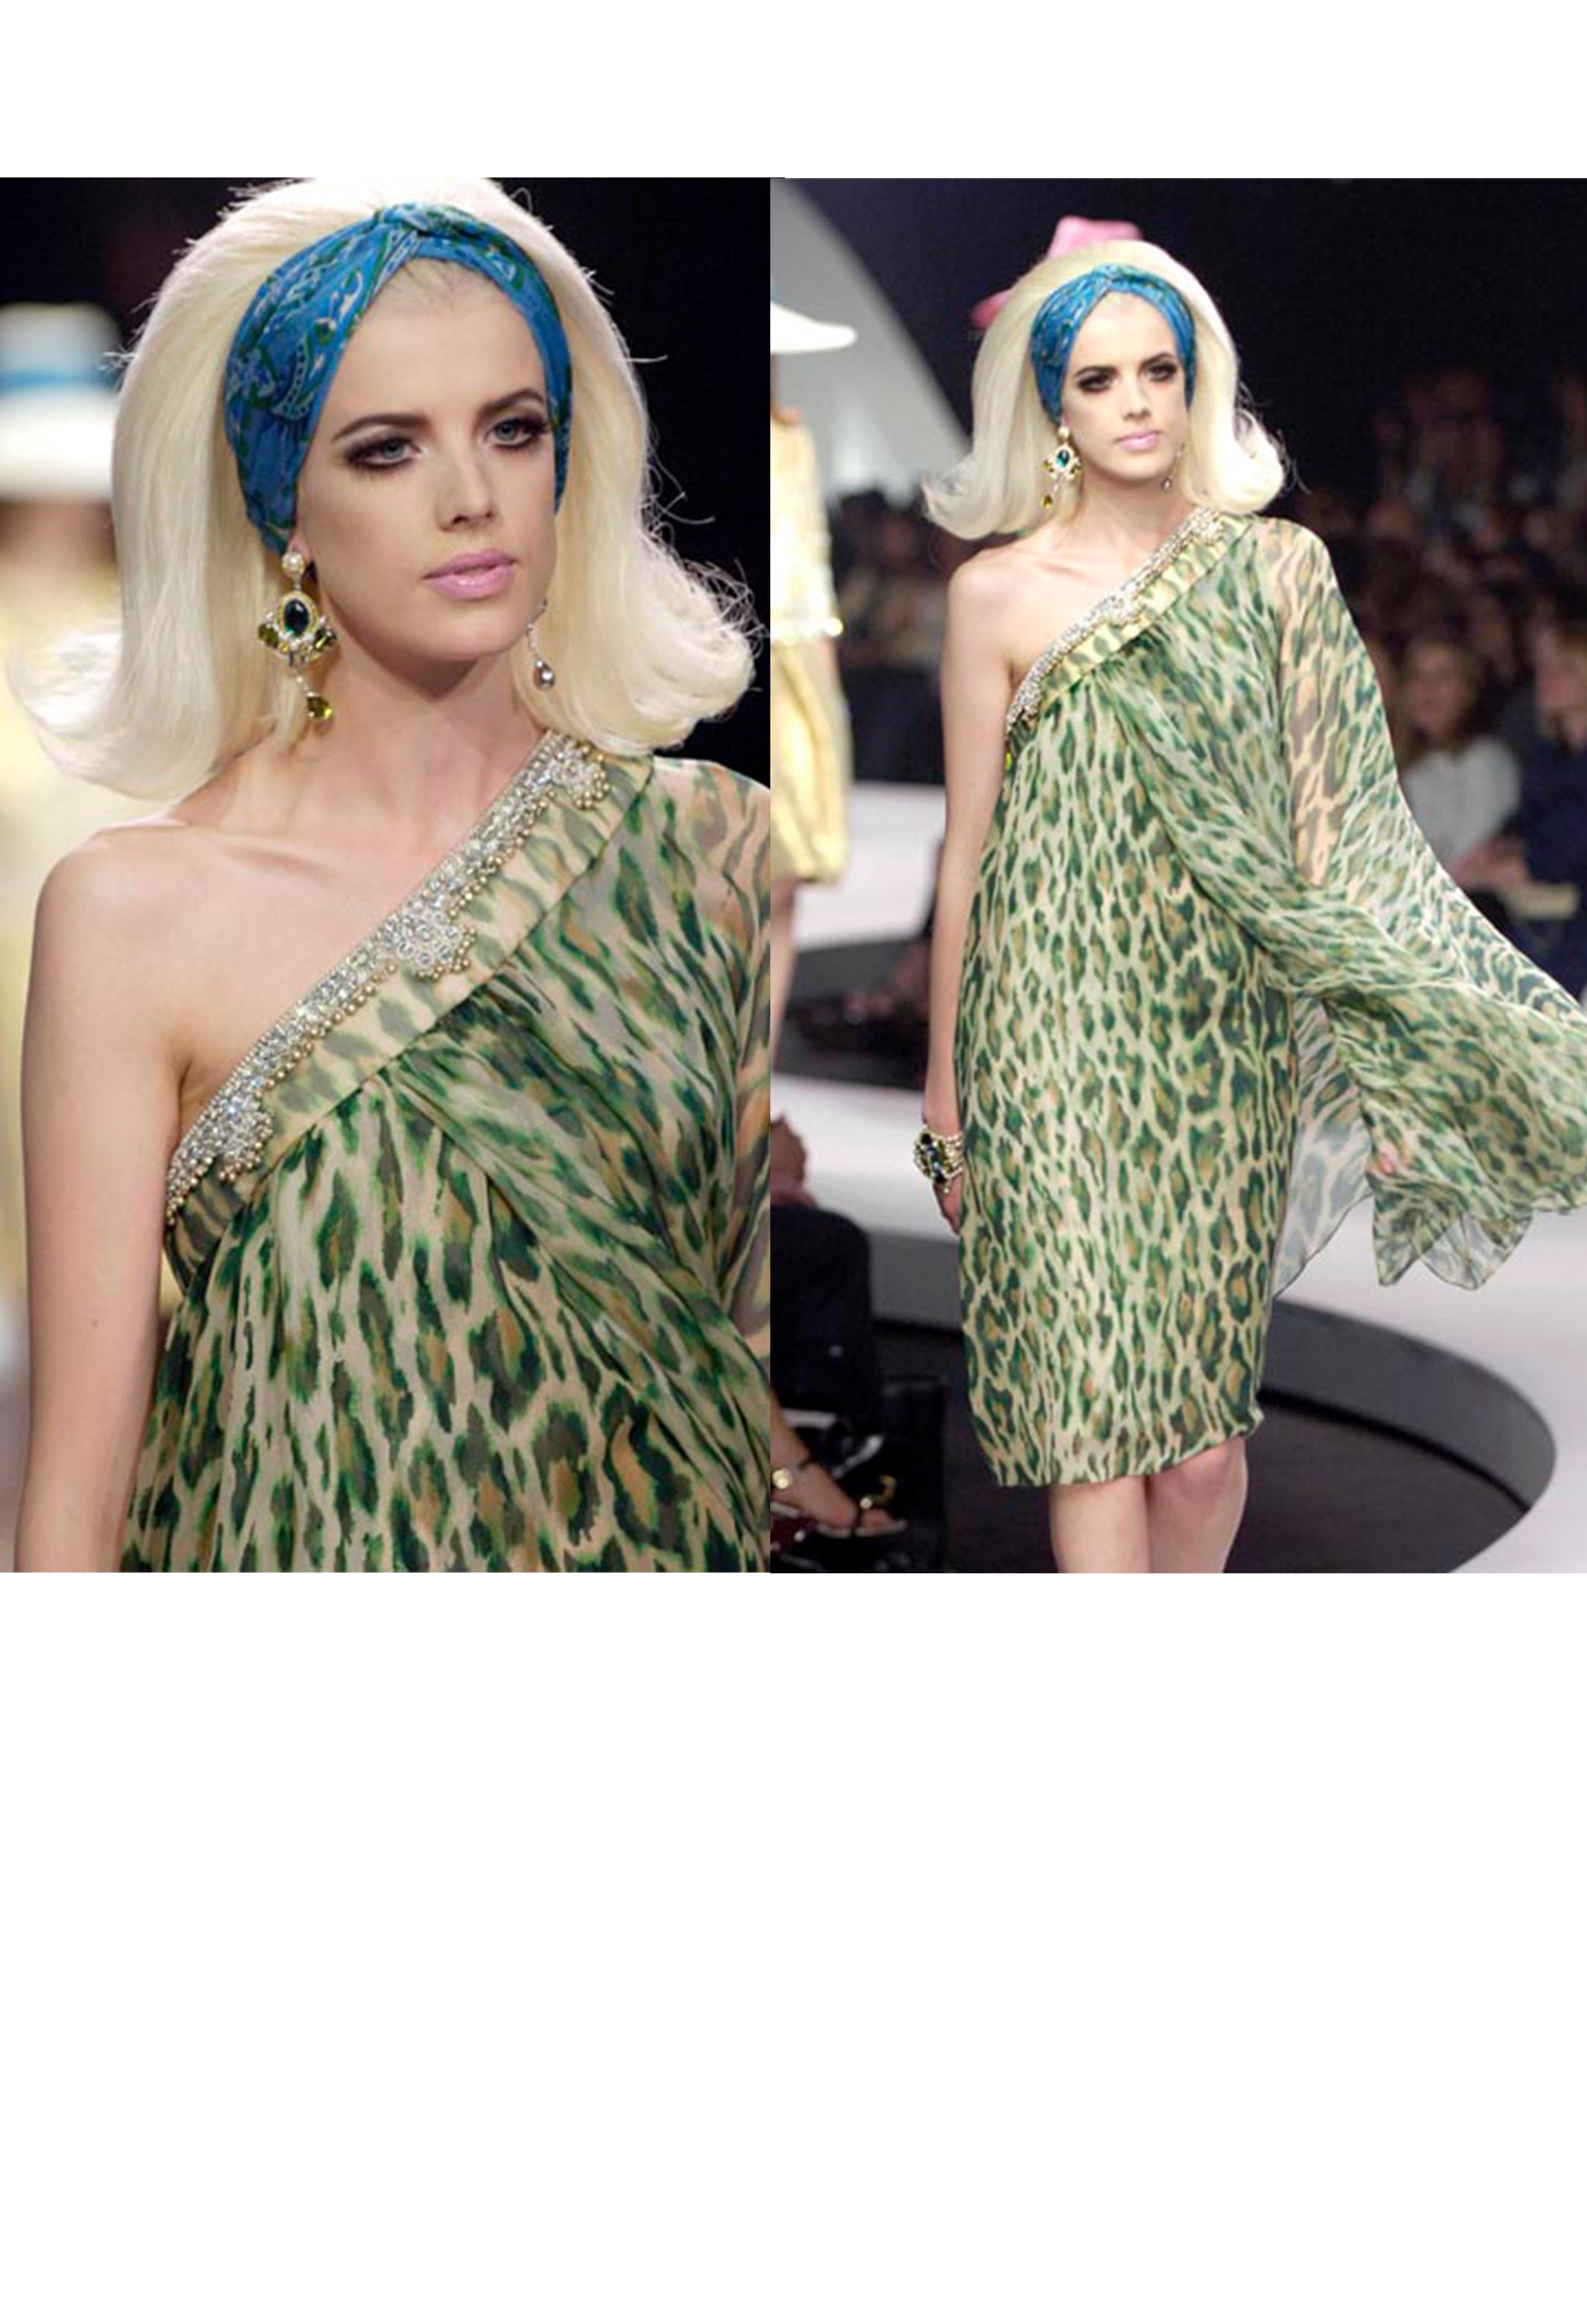 Christian Dior Green Leopard One Shoulder Sari Dress 2008 In Excellent Condition For Sale In Los Angeles, CA